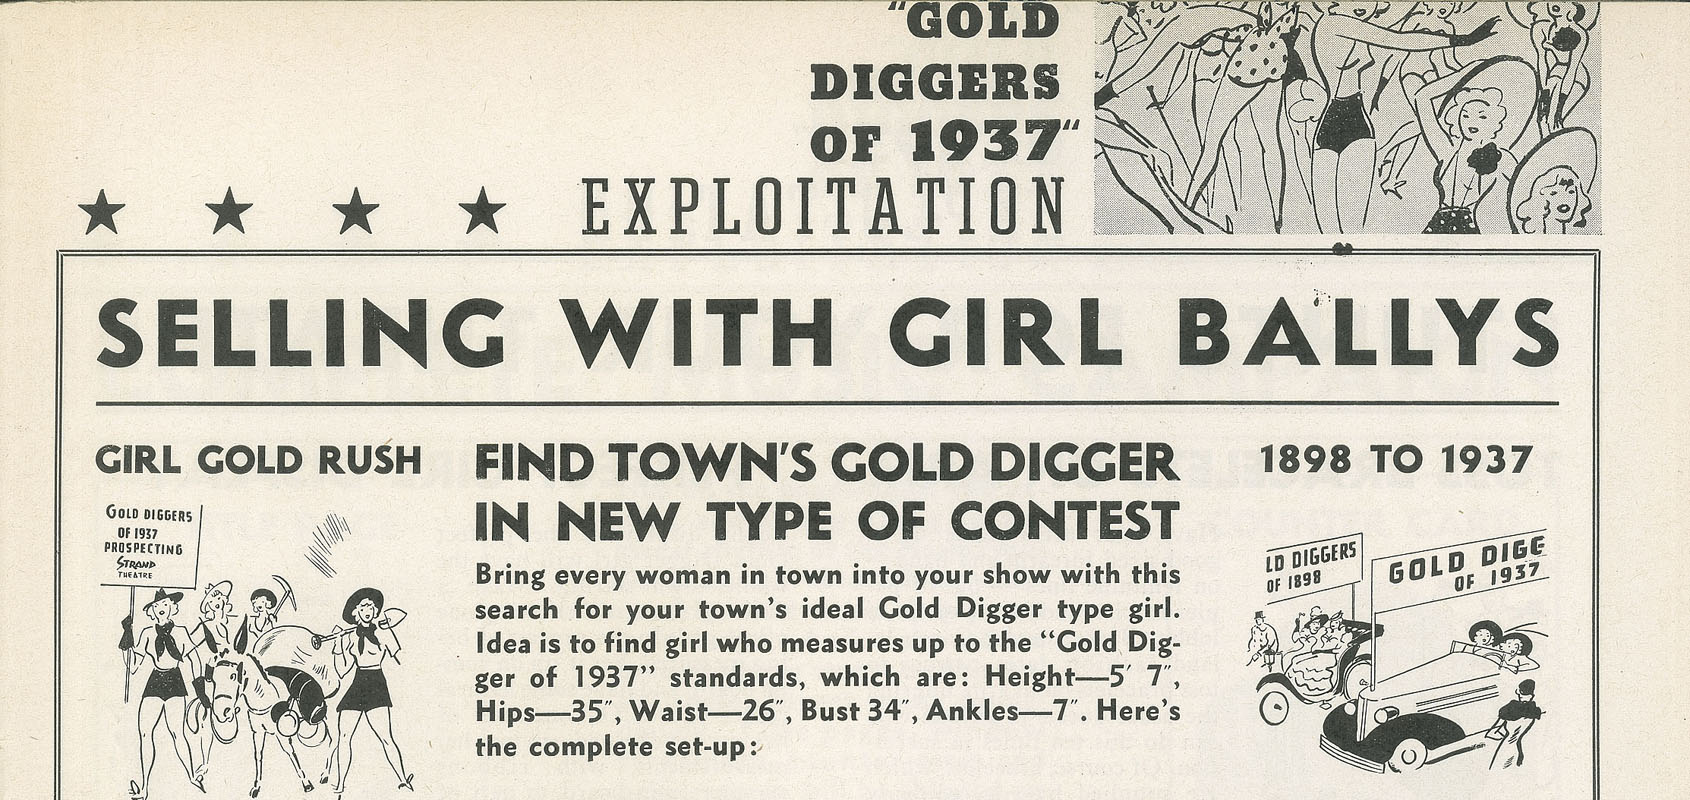 Excerpt from Page 6 of Gold Diggers of 1937 press book.